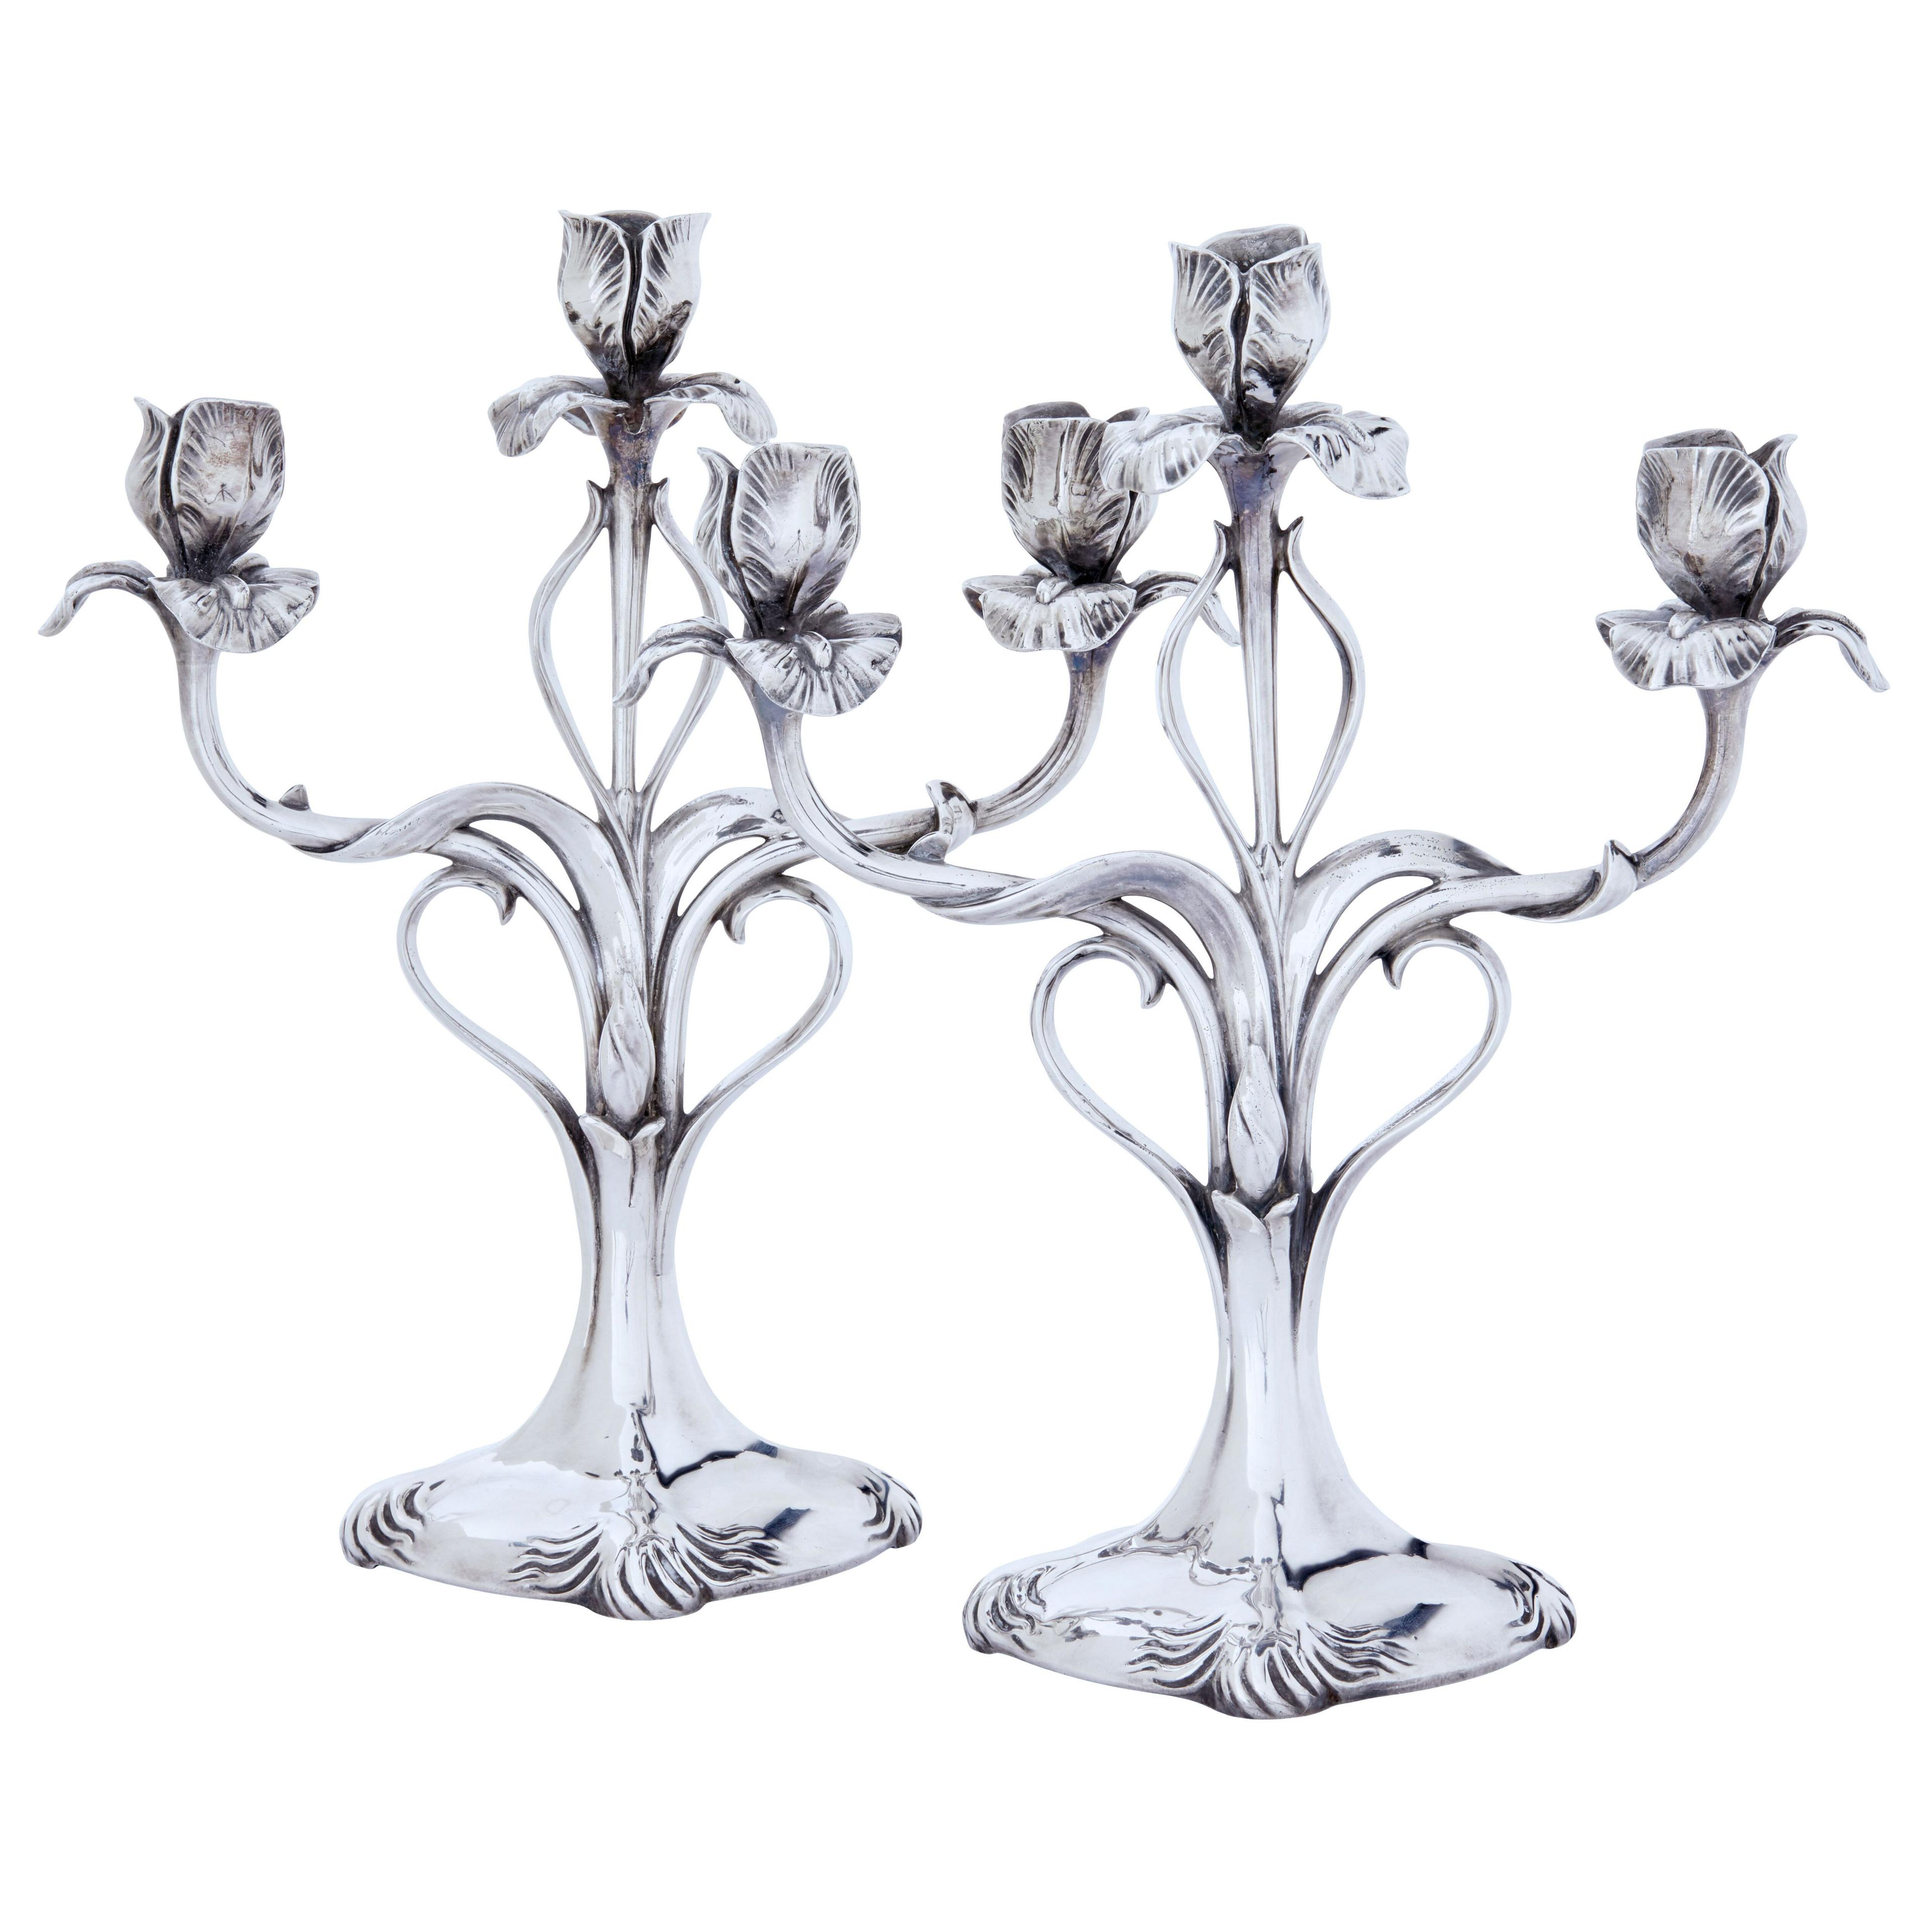 PAIR OF SILVER PLATE CANDLESTICKS BY CHRISTOFLE